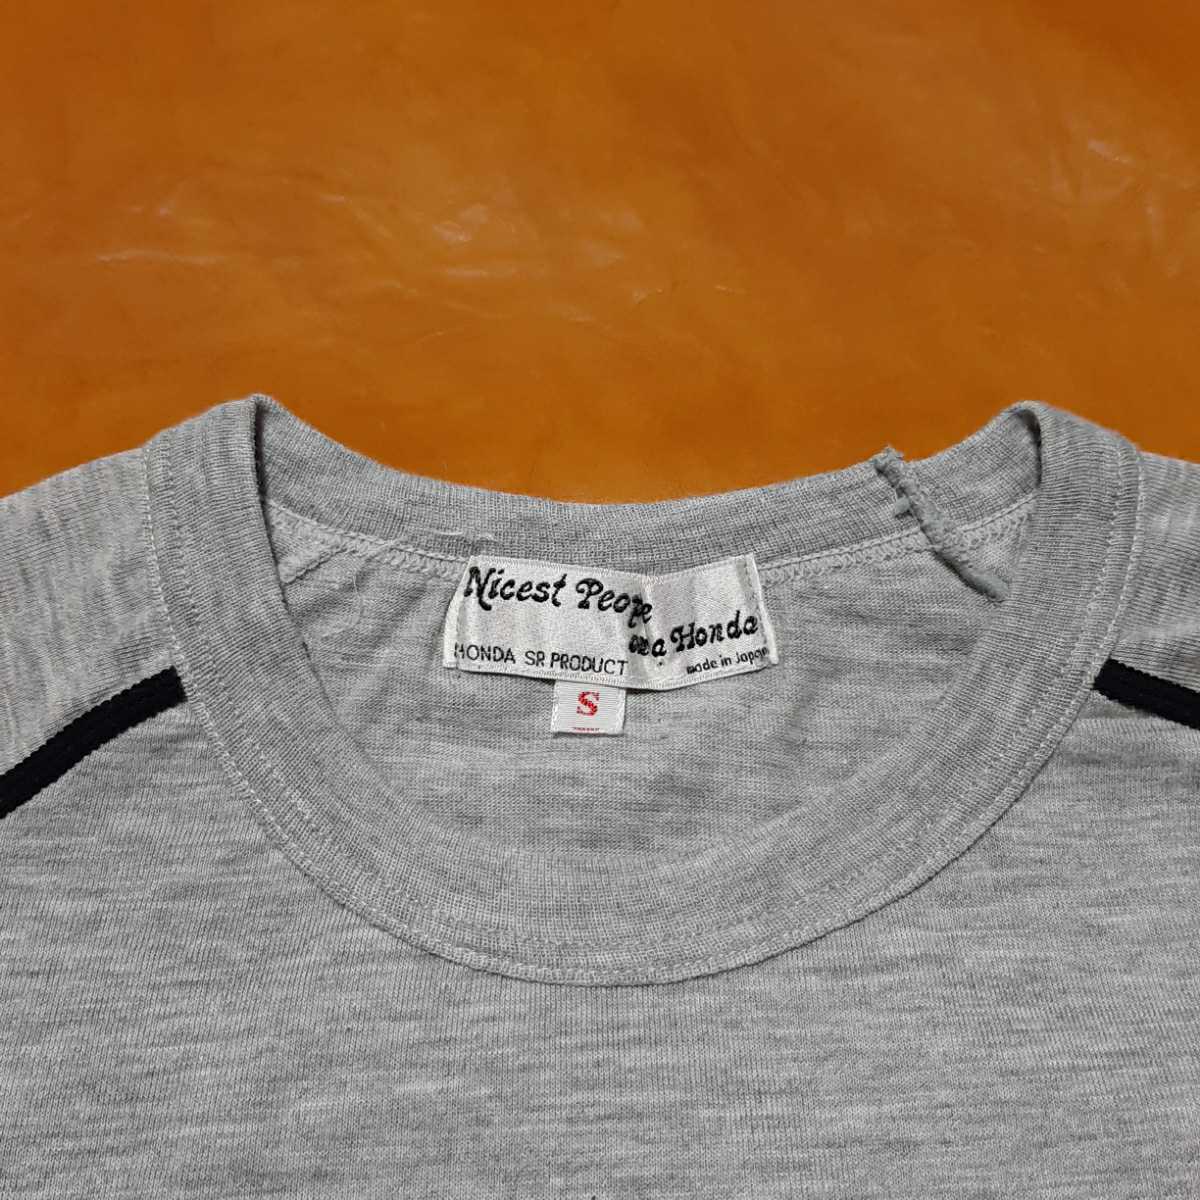  Honda HONDA SR PRODUCT Novelty T-shirt Nice Friends Nice Manners gray S made in Japan Showa era that time thing not yet have on Nicest People campaign 